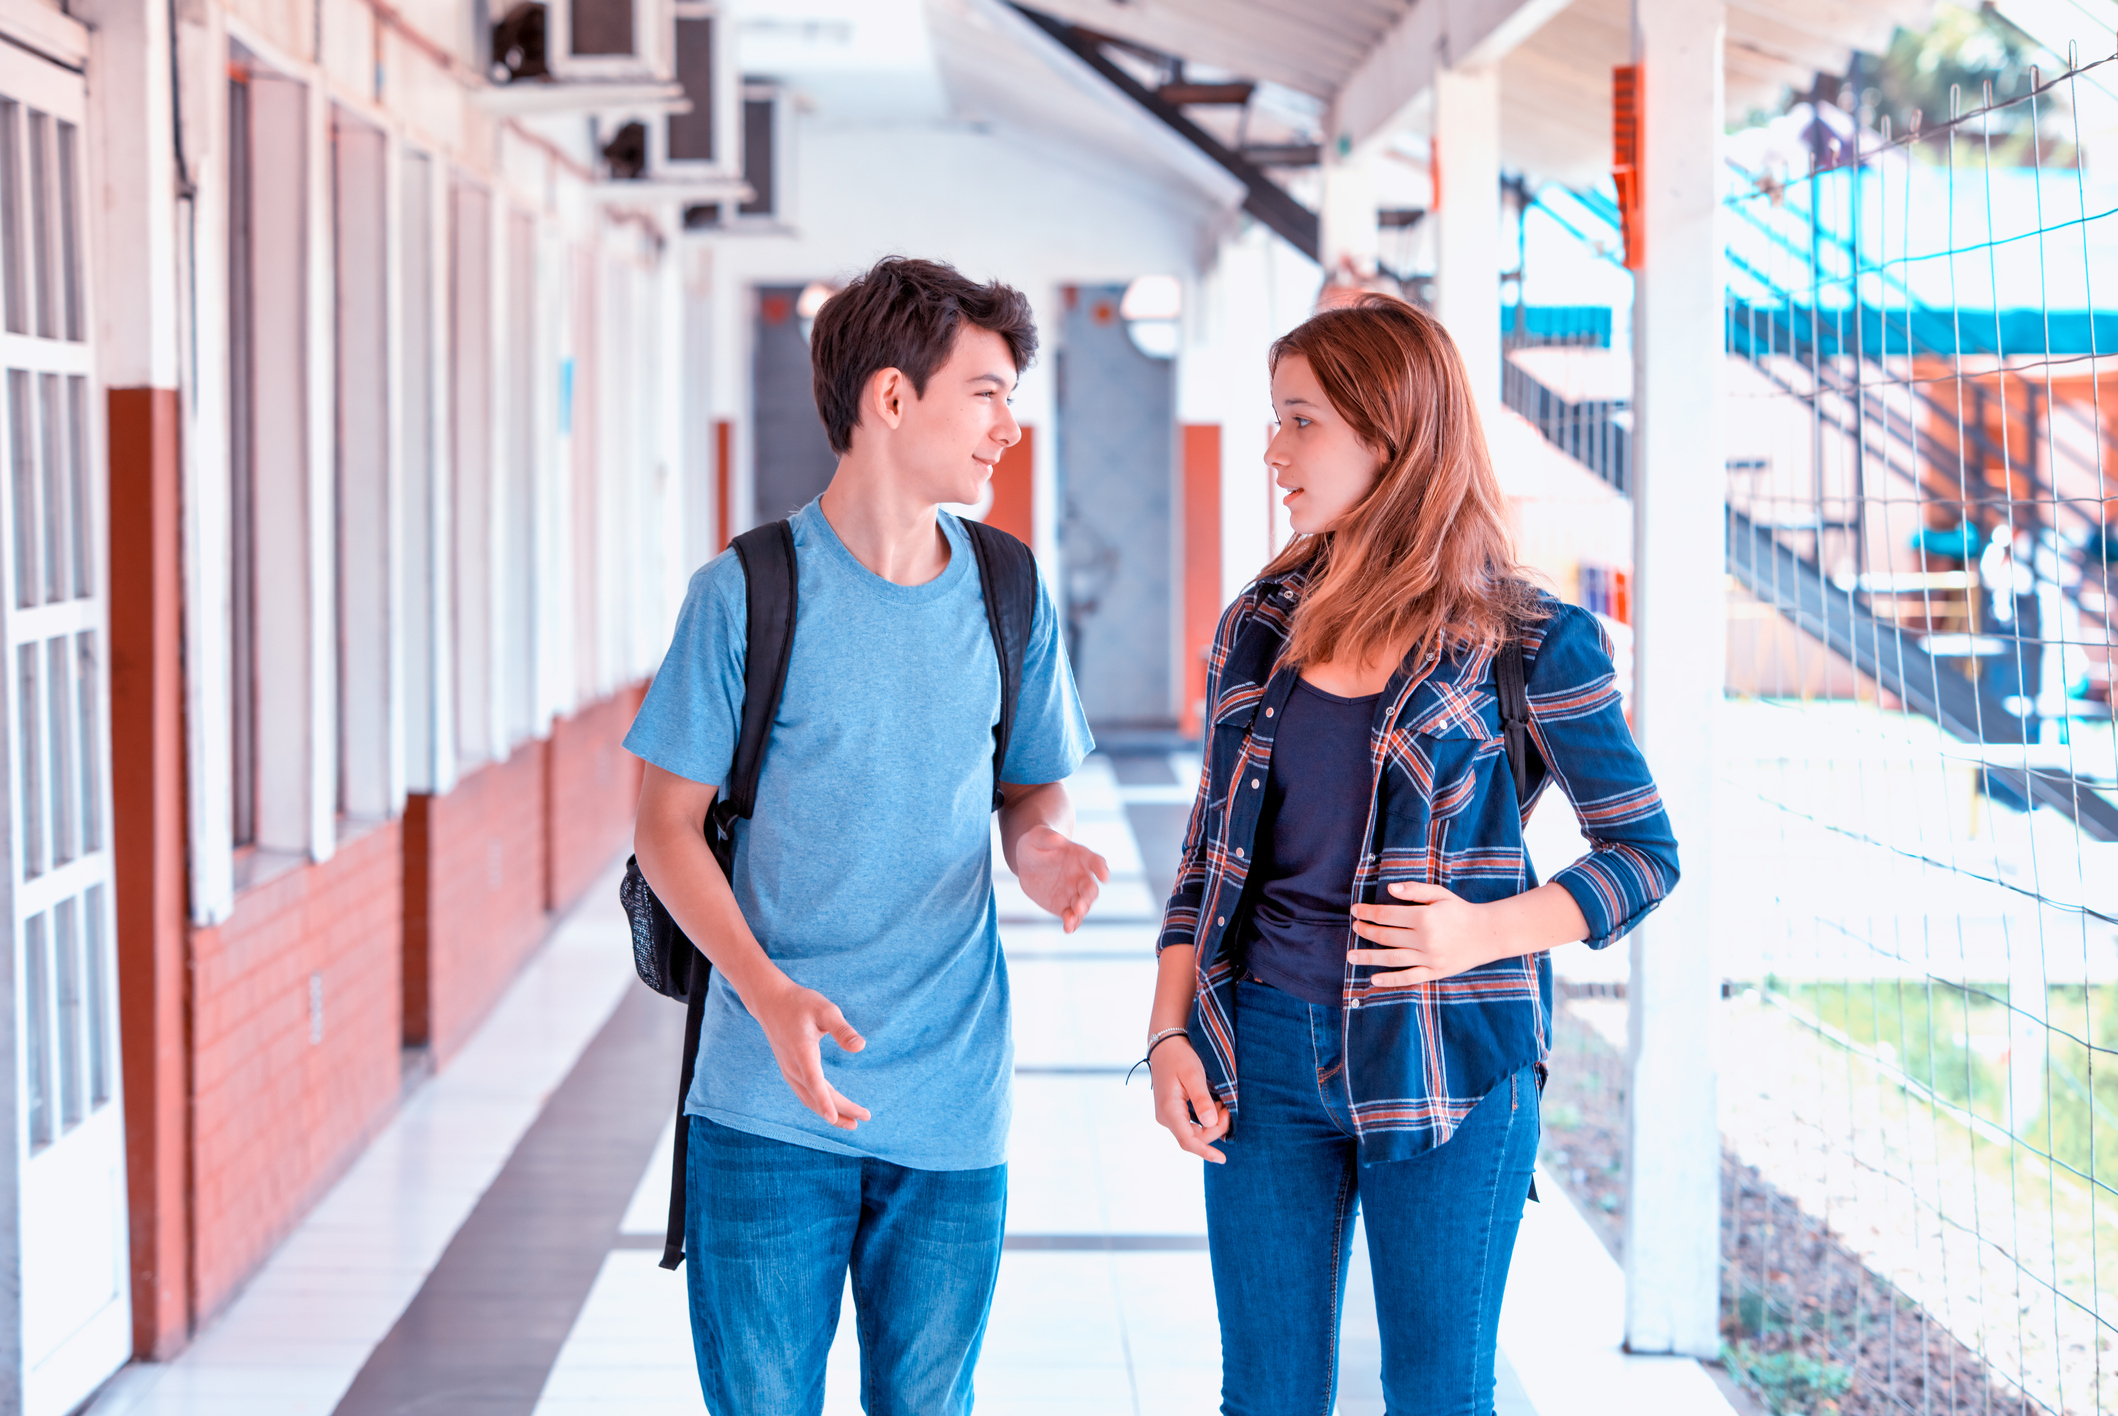 Two people chatting while walking in a school hallway